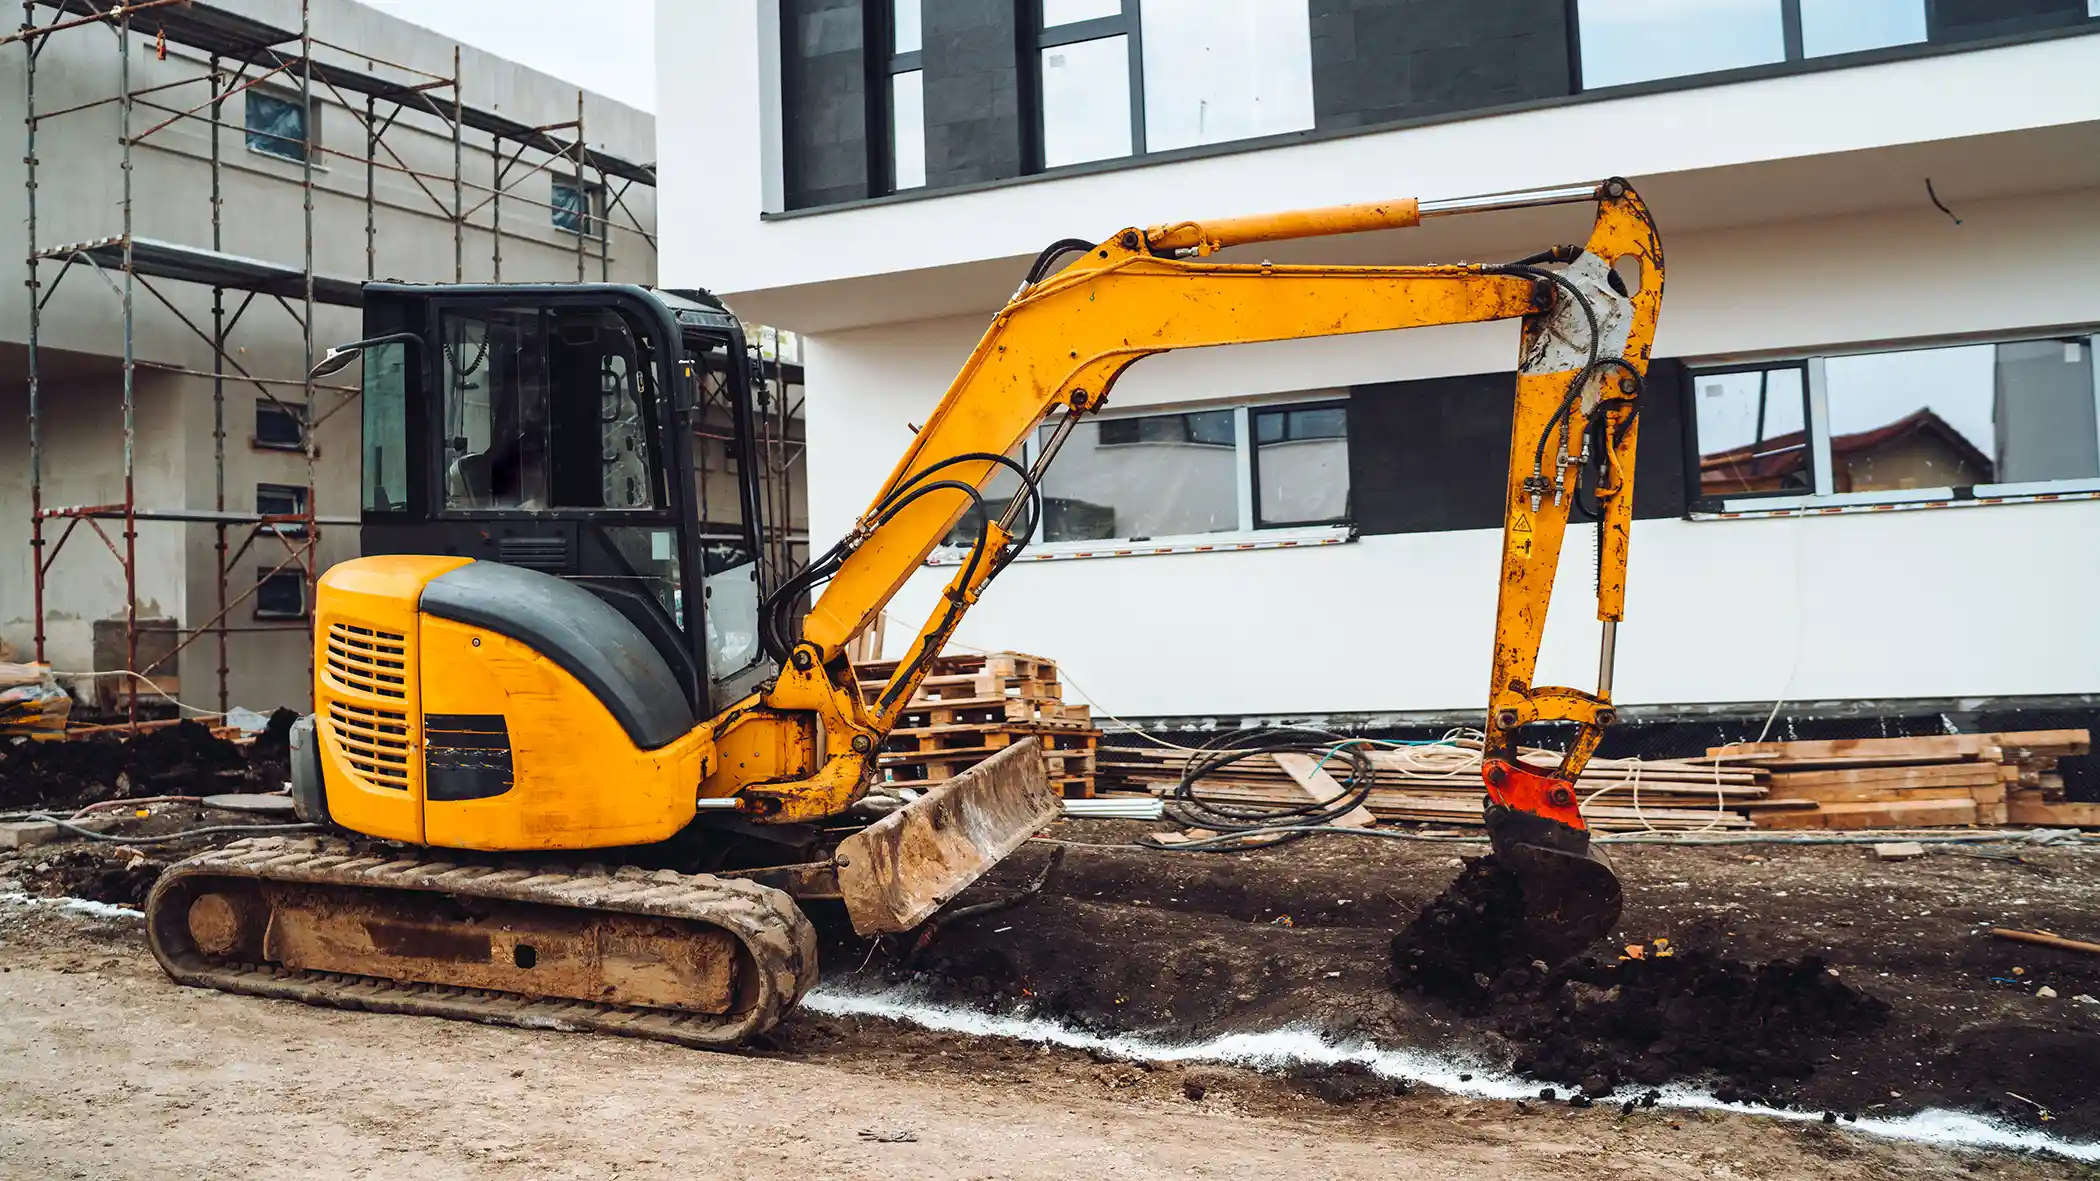 Small yellow excavator doing landscape work on house construction site